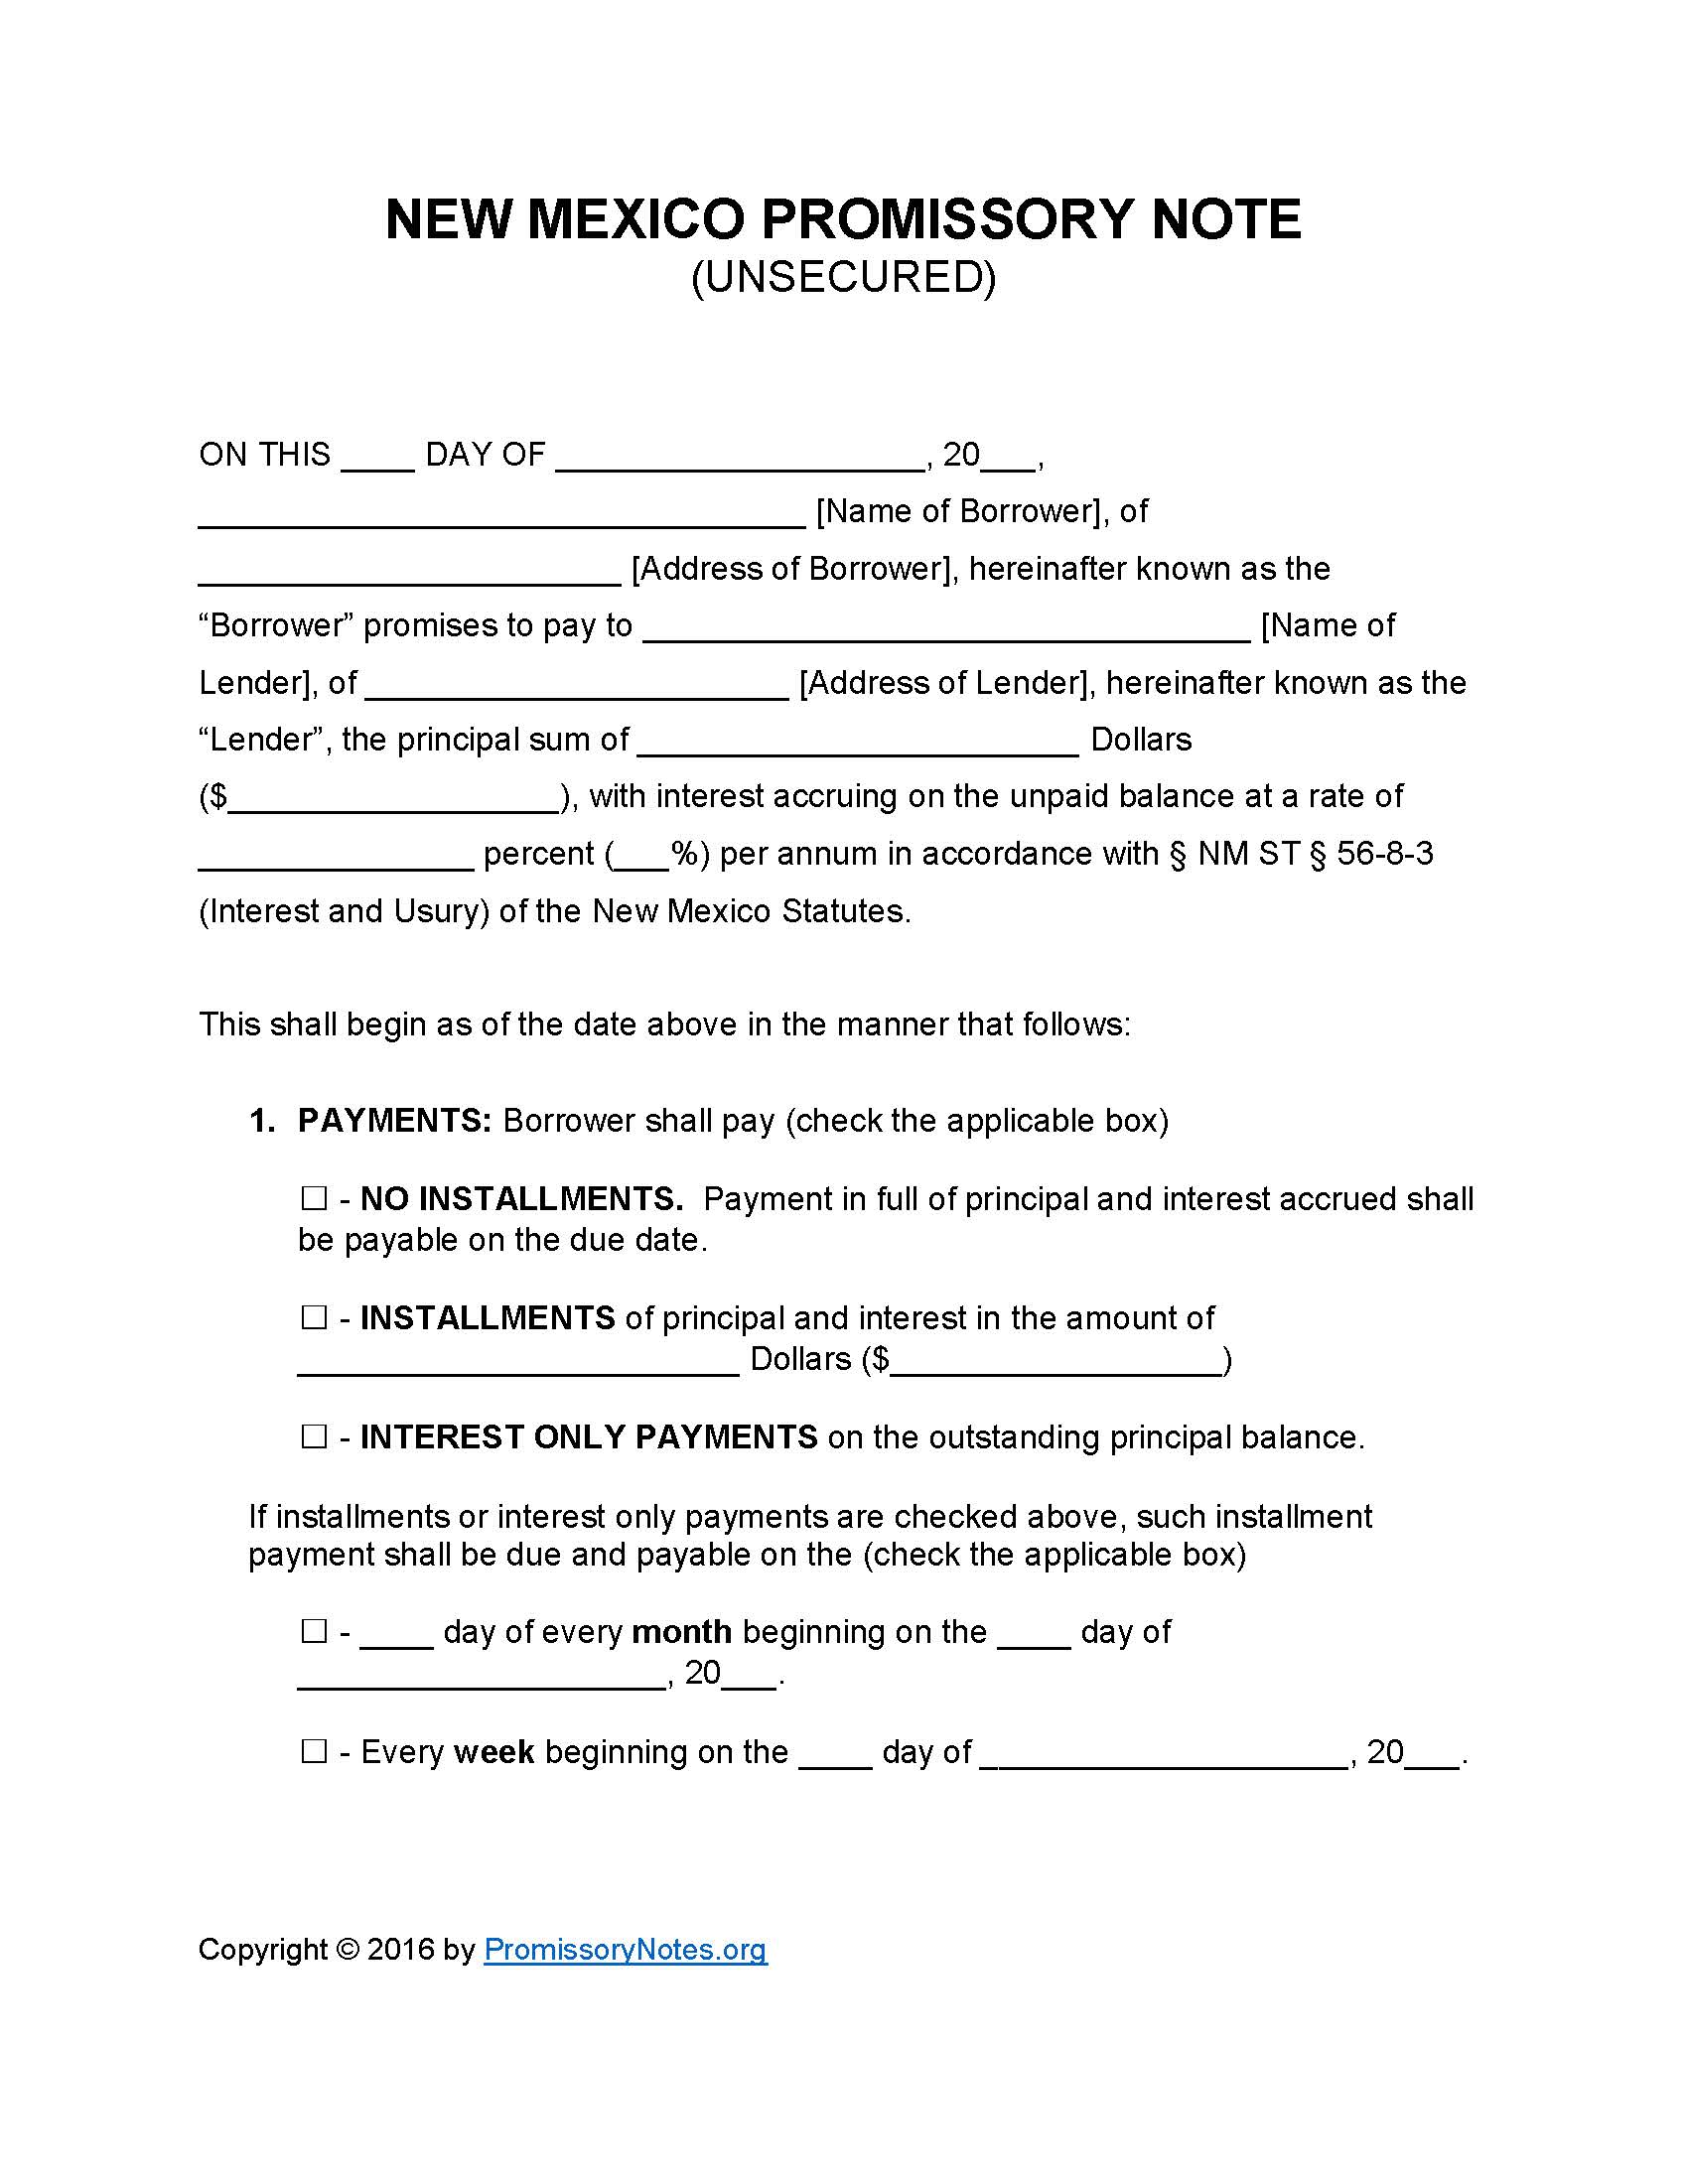 new-mexico-unsecured-promissory-note-form